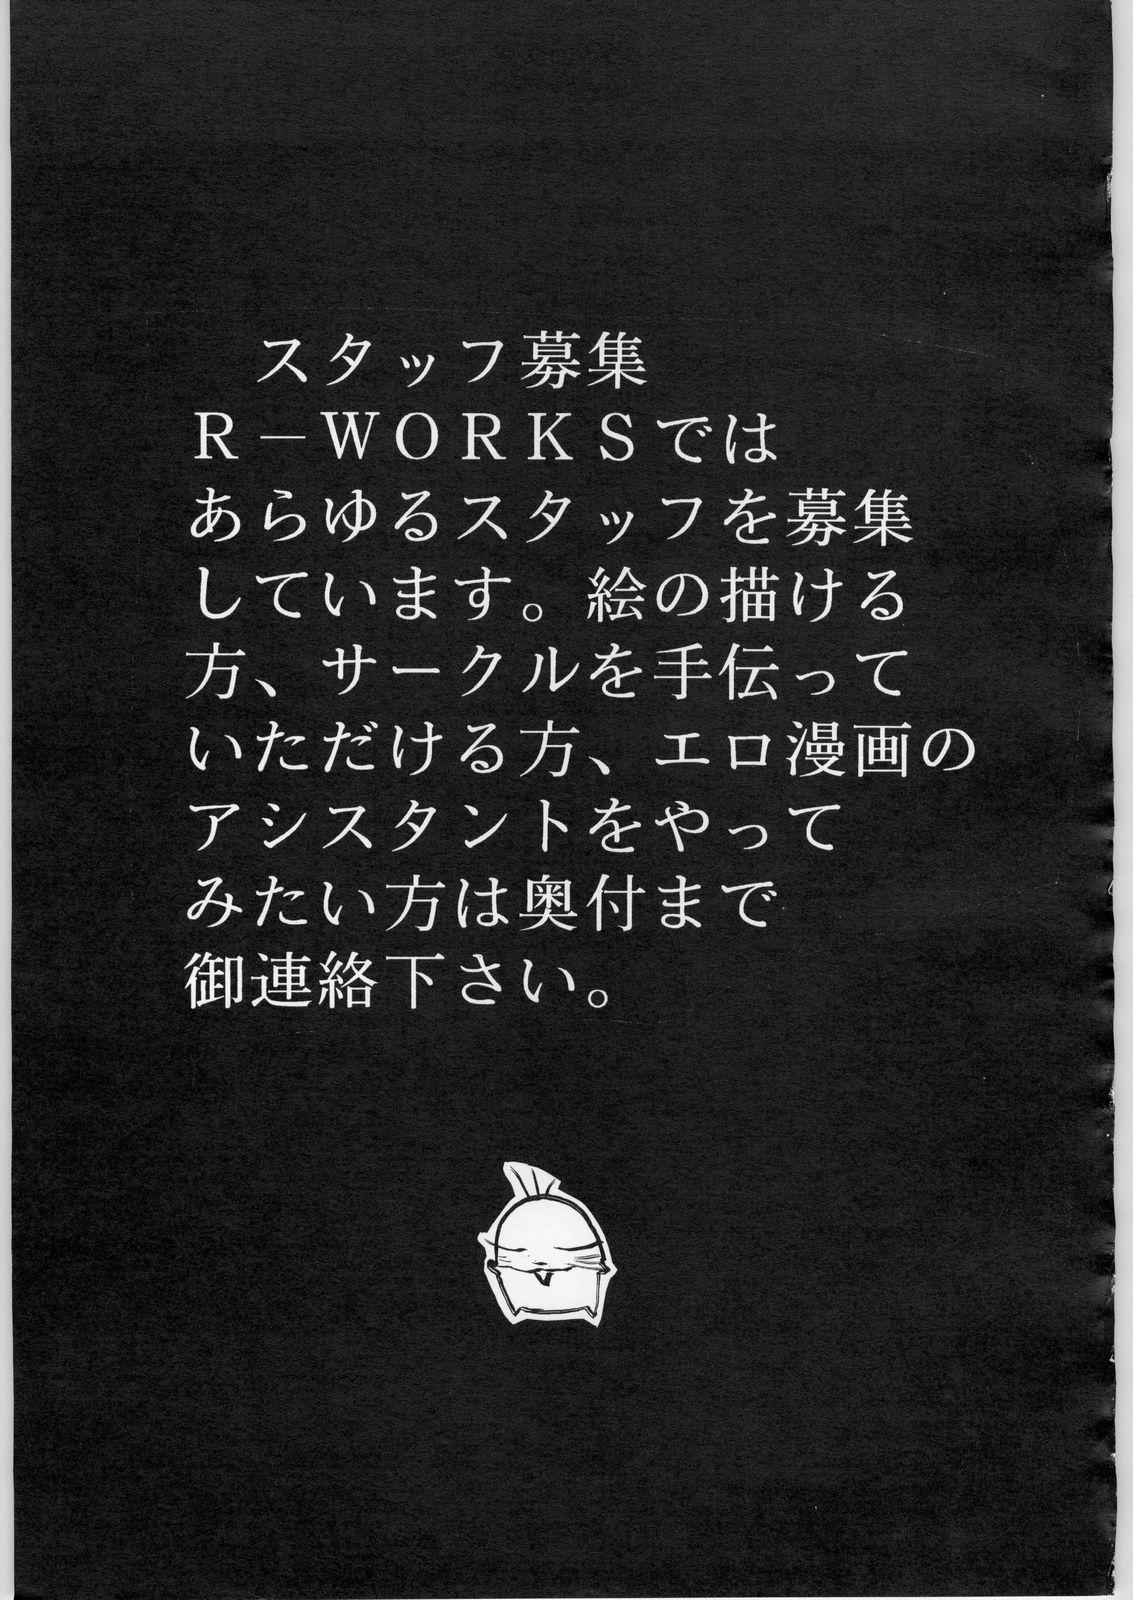 R-Works 1st Book 43